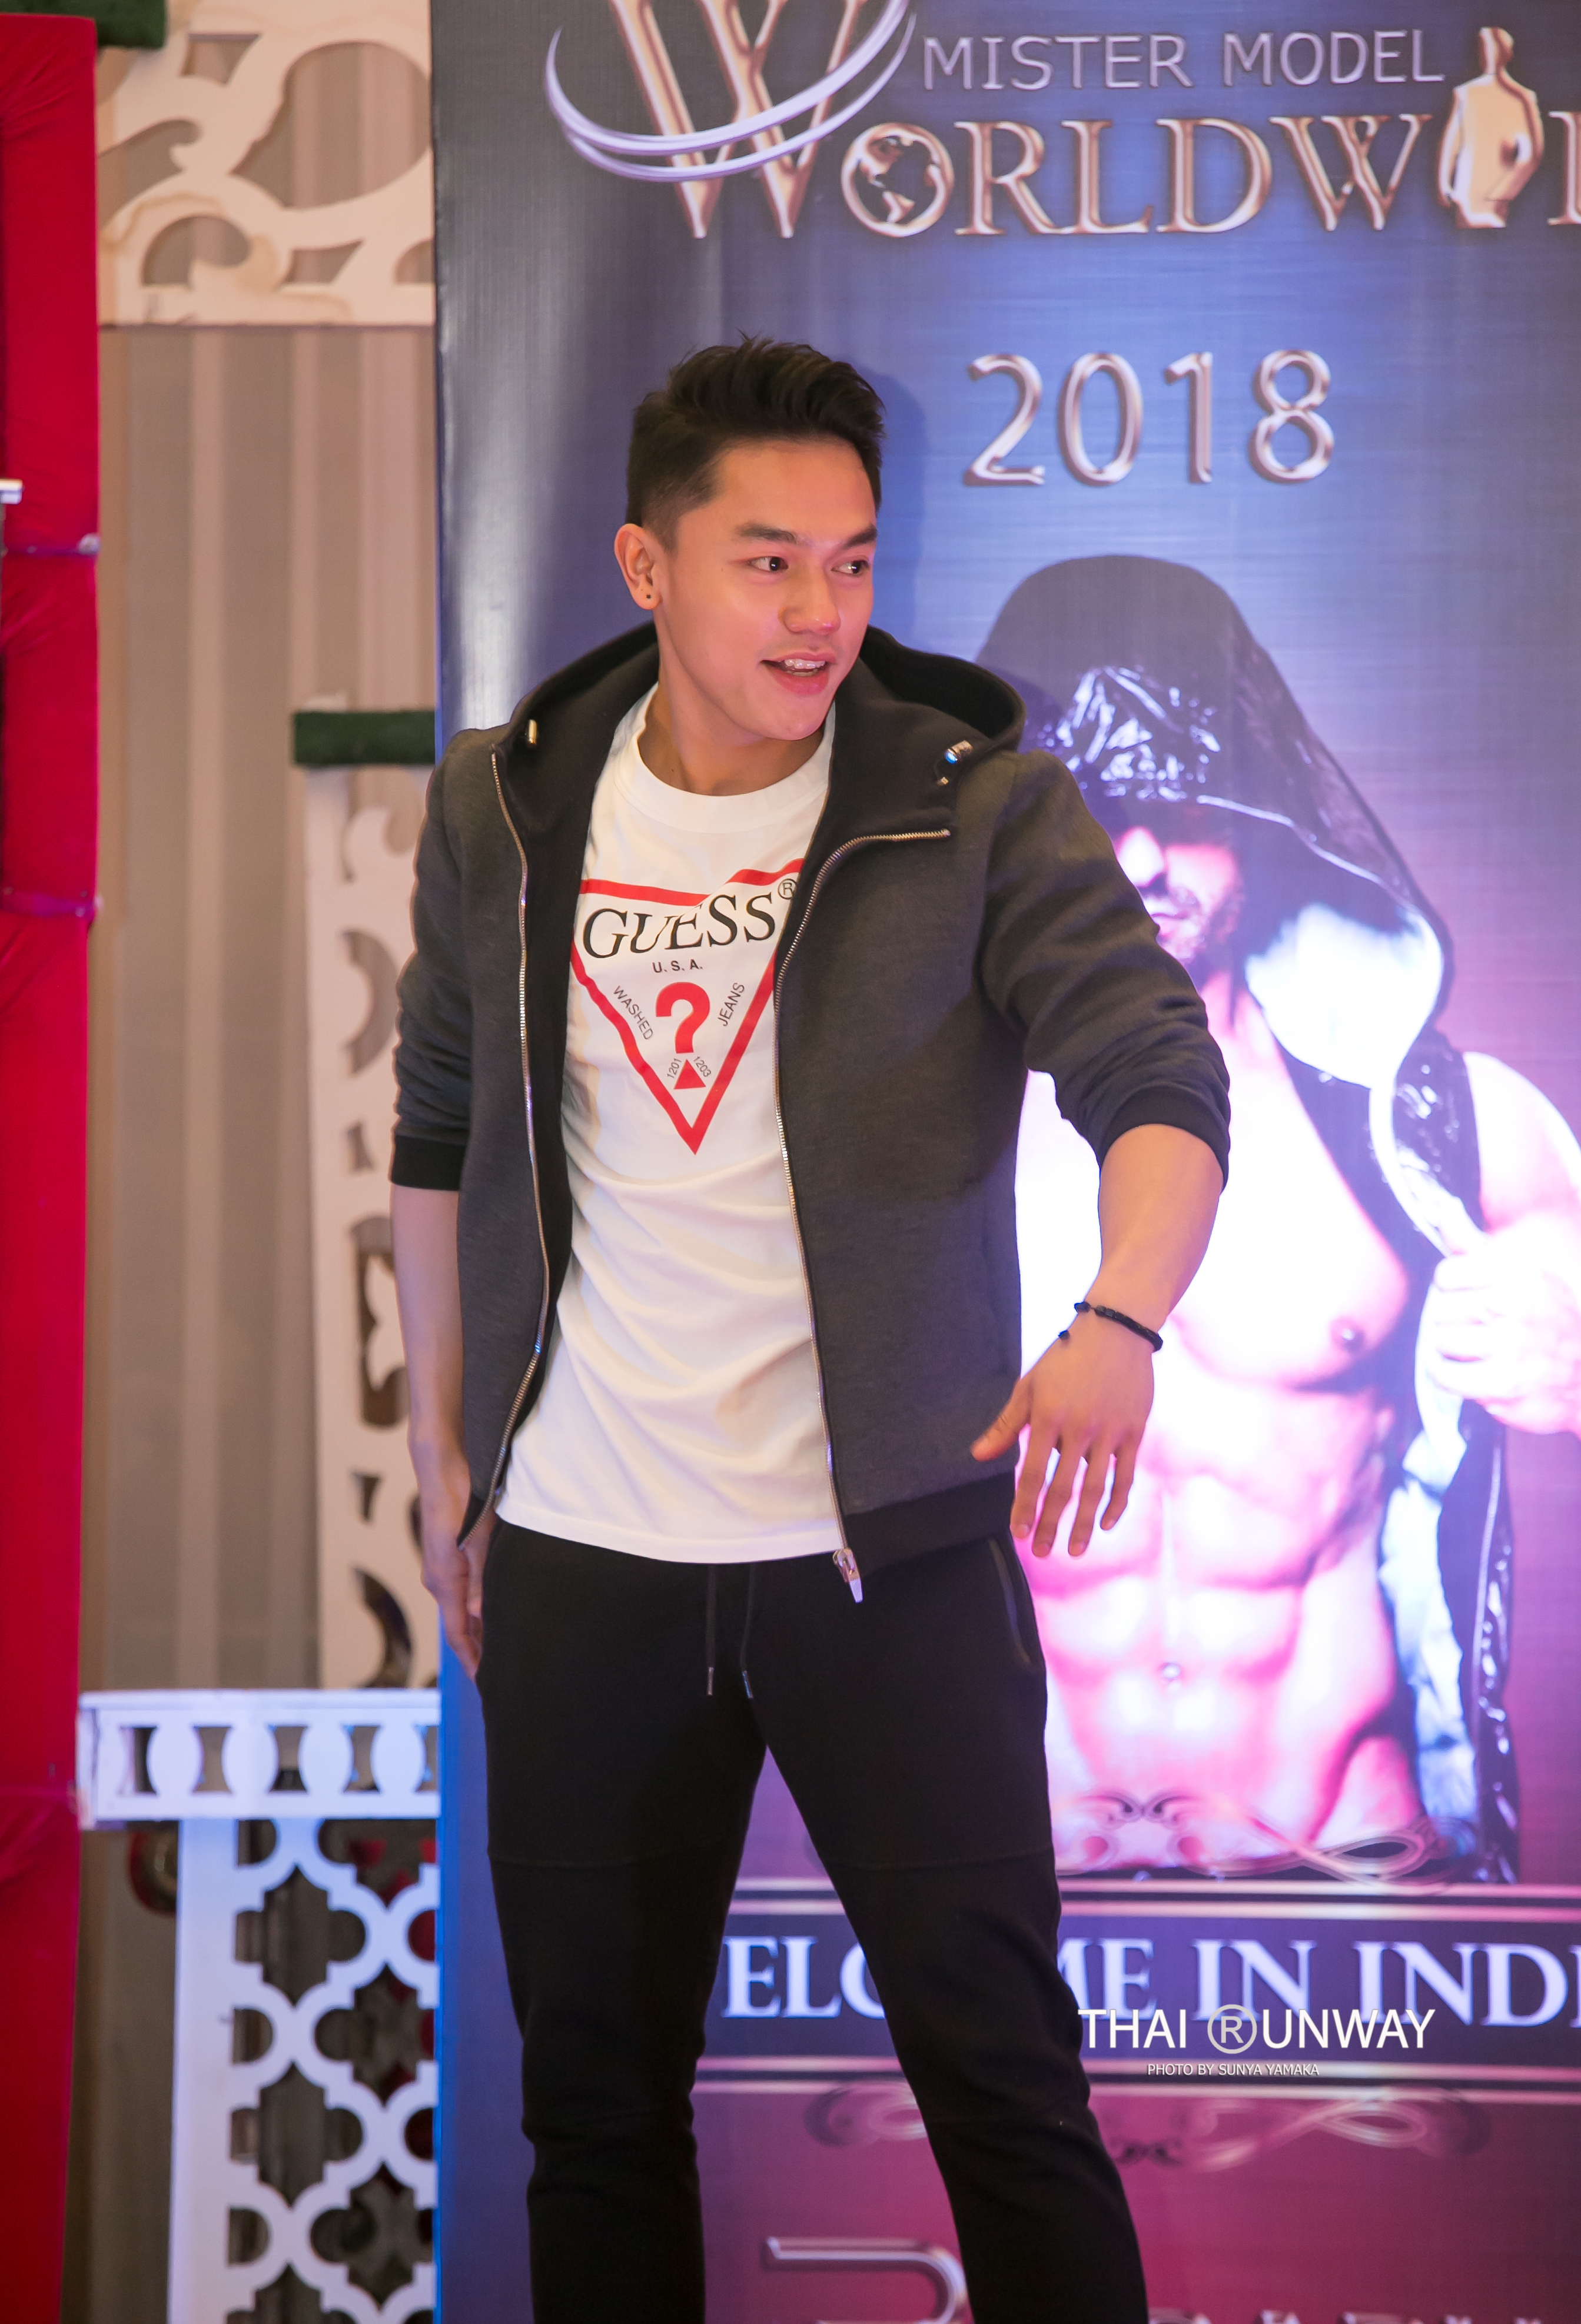 Carlo Pasion during the talent segment of Mister Model Worldwide 2018 competition. Picture by Thai Runway / Sunya Yamaka